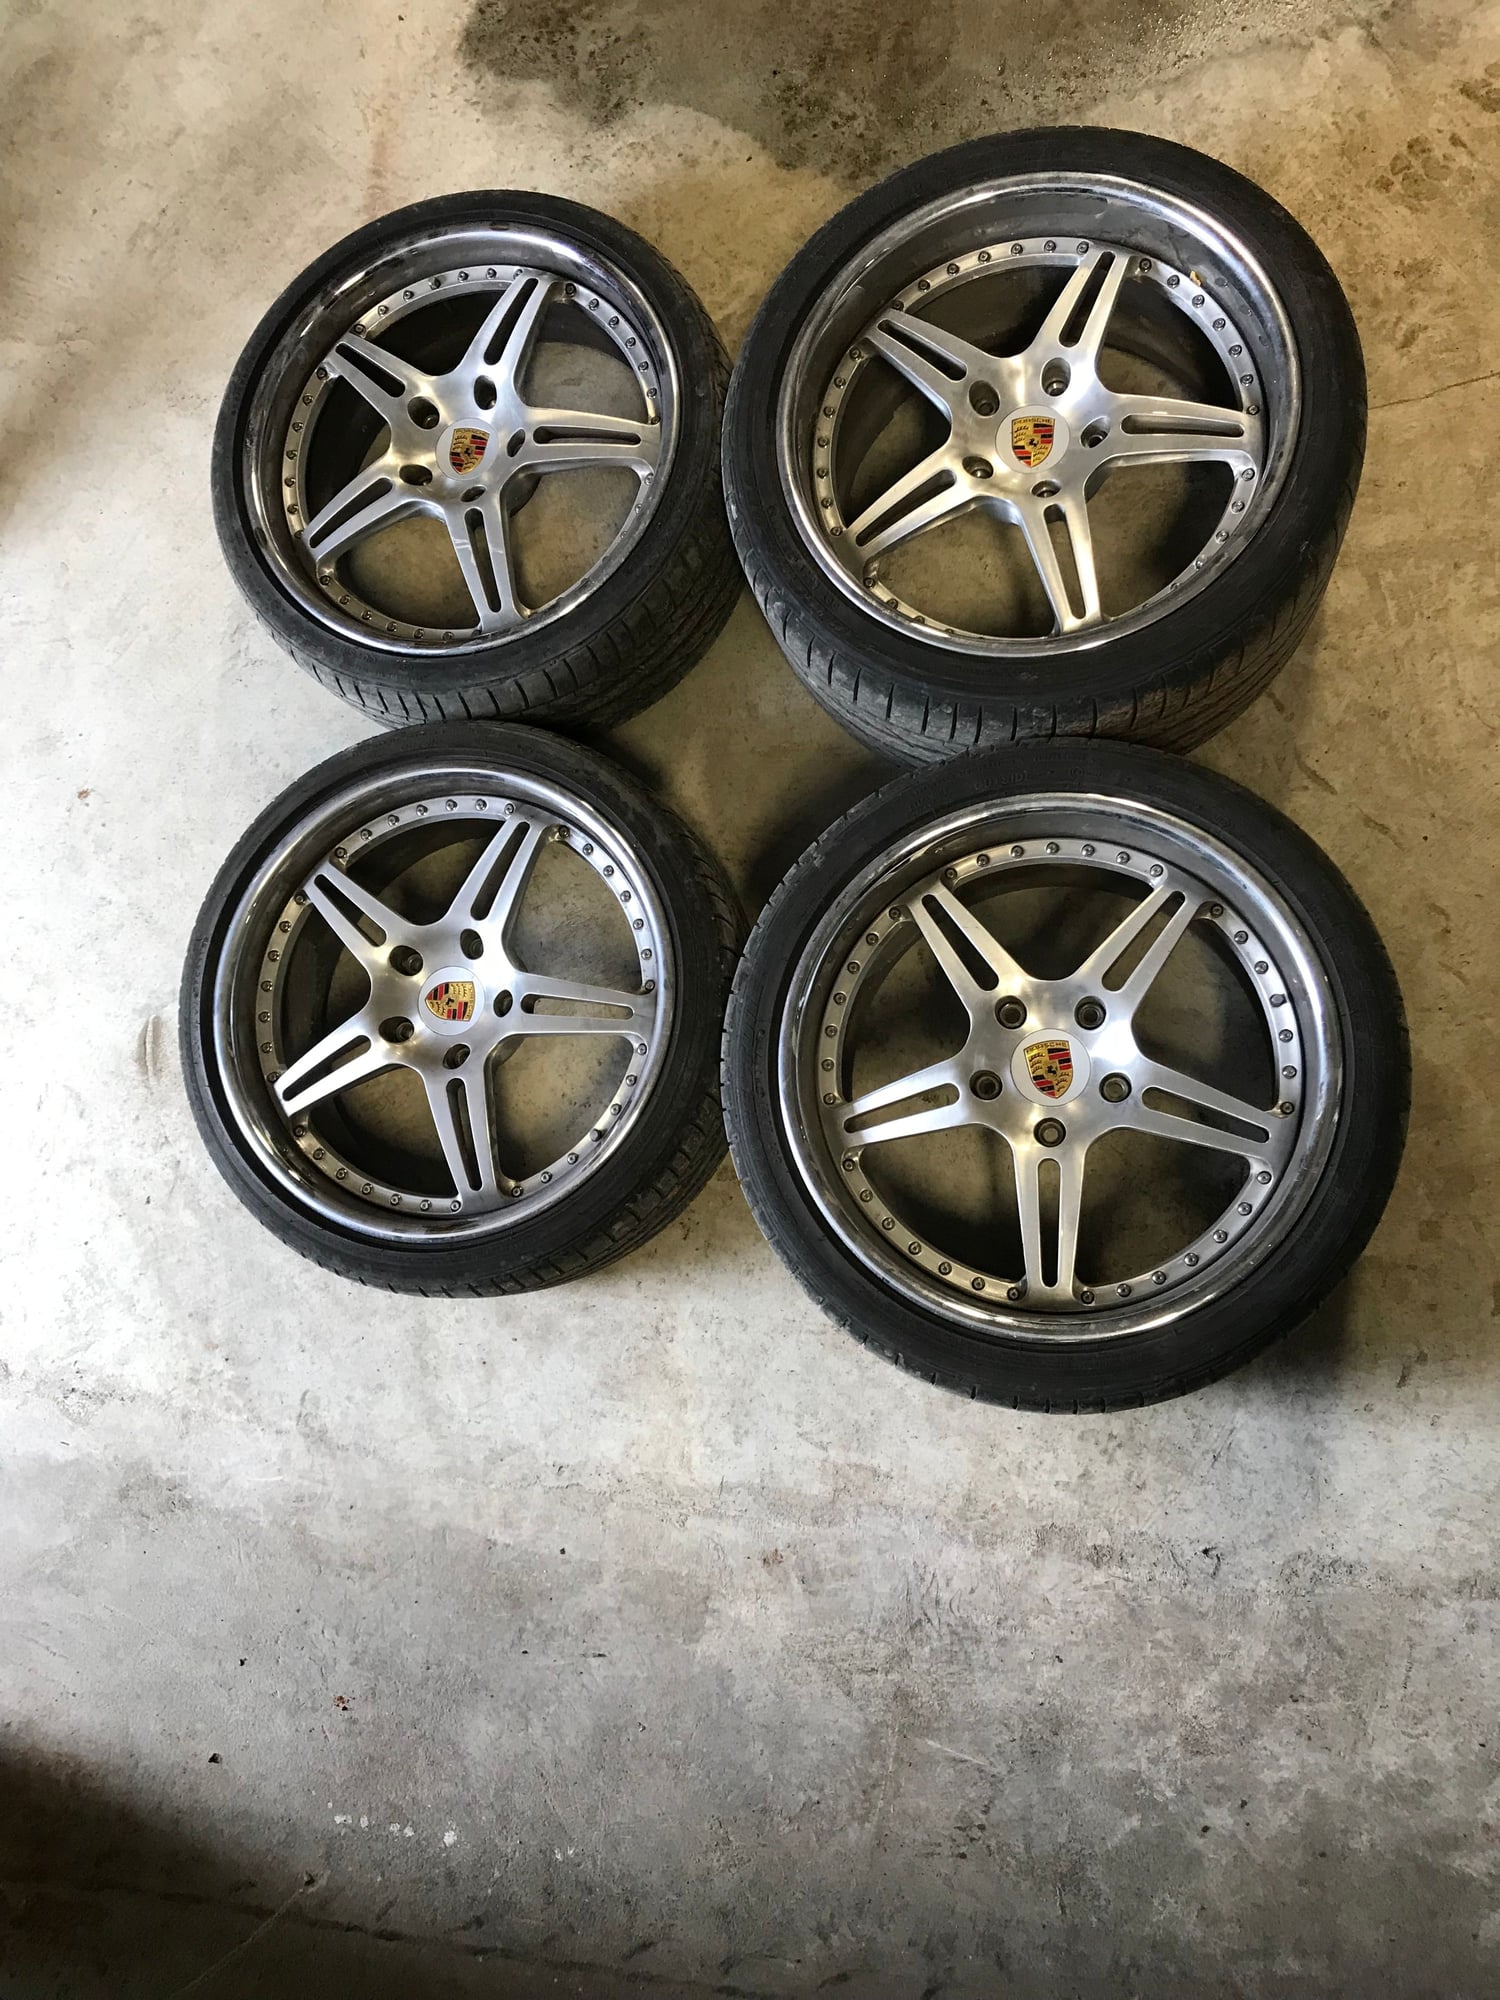 Wheels and Tires/Axles - 19" Staggered HRE 3 Piece Forged Wheels - Used - Mertztown, PA 19539, United States